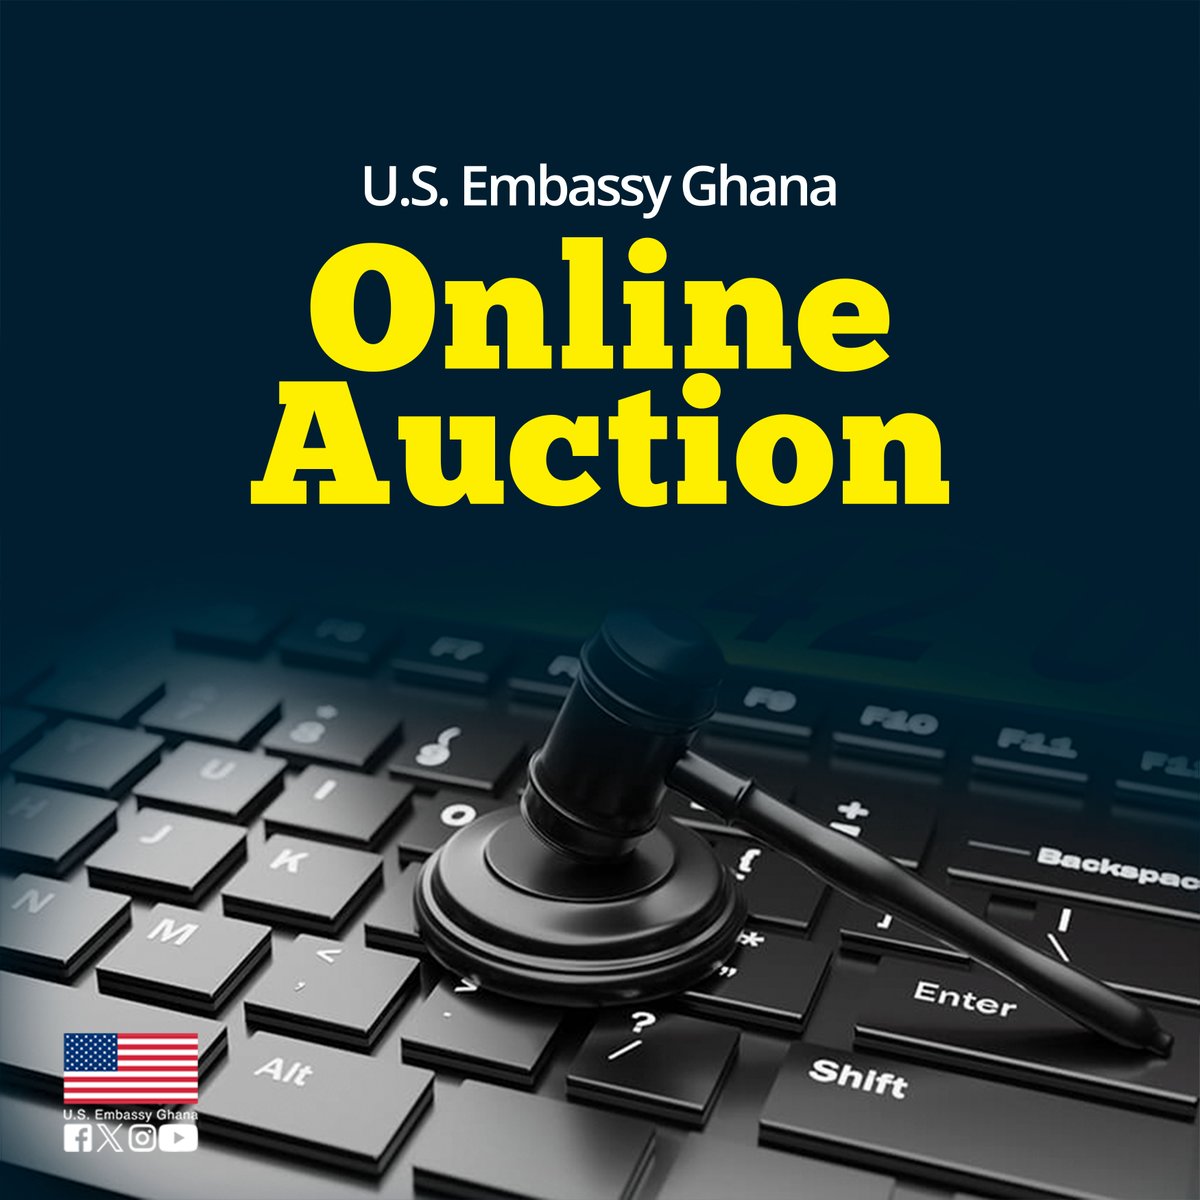 The U.S. Embassy will conduct an online auction of surplus property. Bidding will open at 8am on May 20, and closes at 8pm on May 22 on online-auction.state.gov. Instructions for bidding and the lots available for purchase can also be viewed on this site.